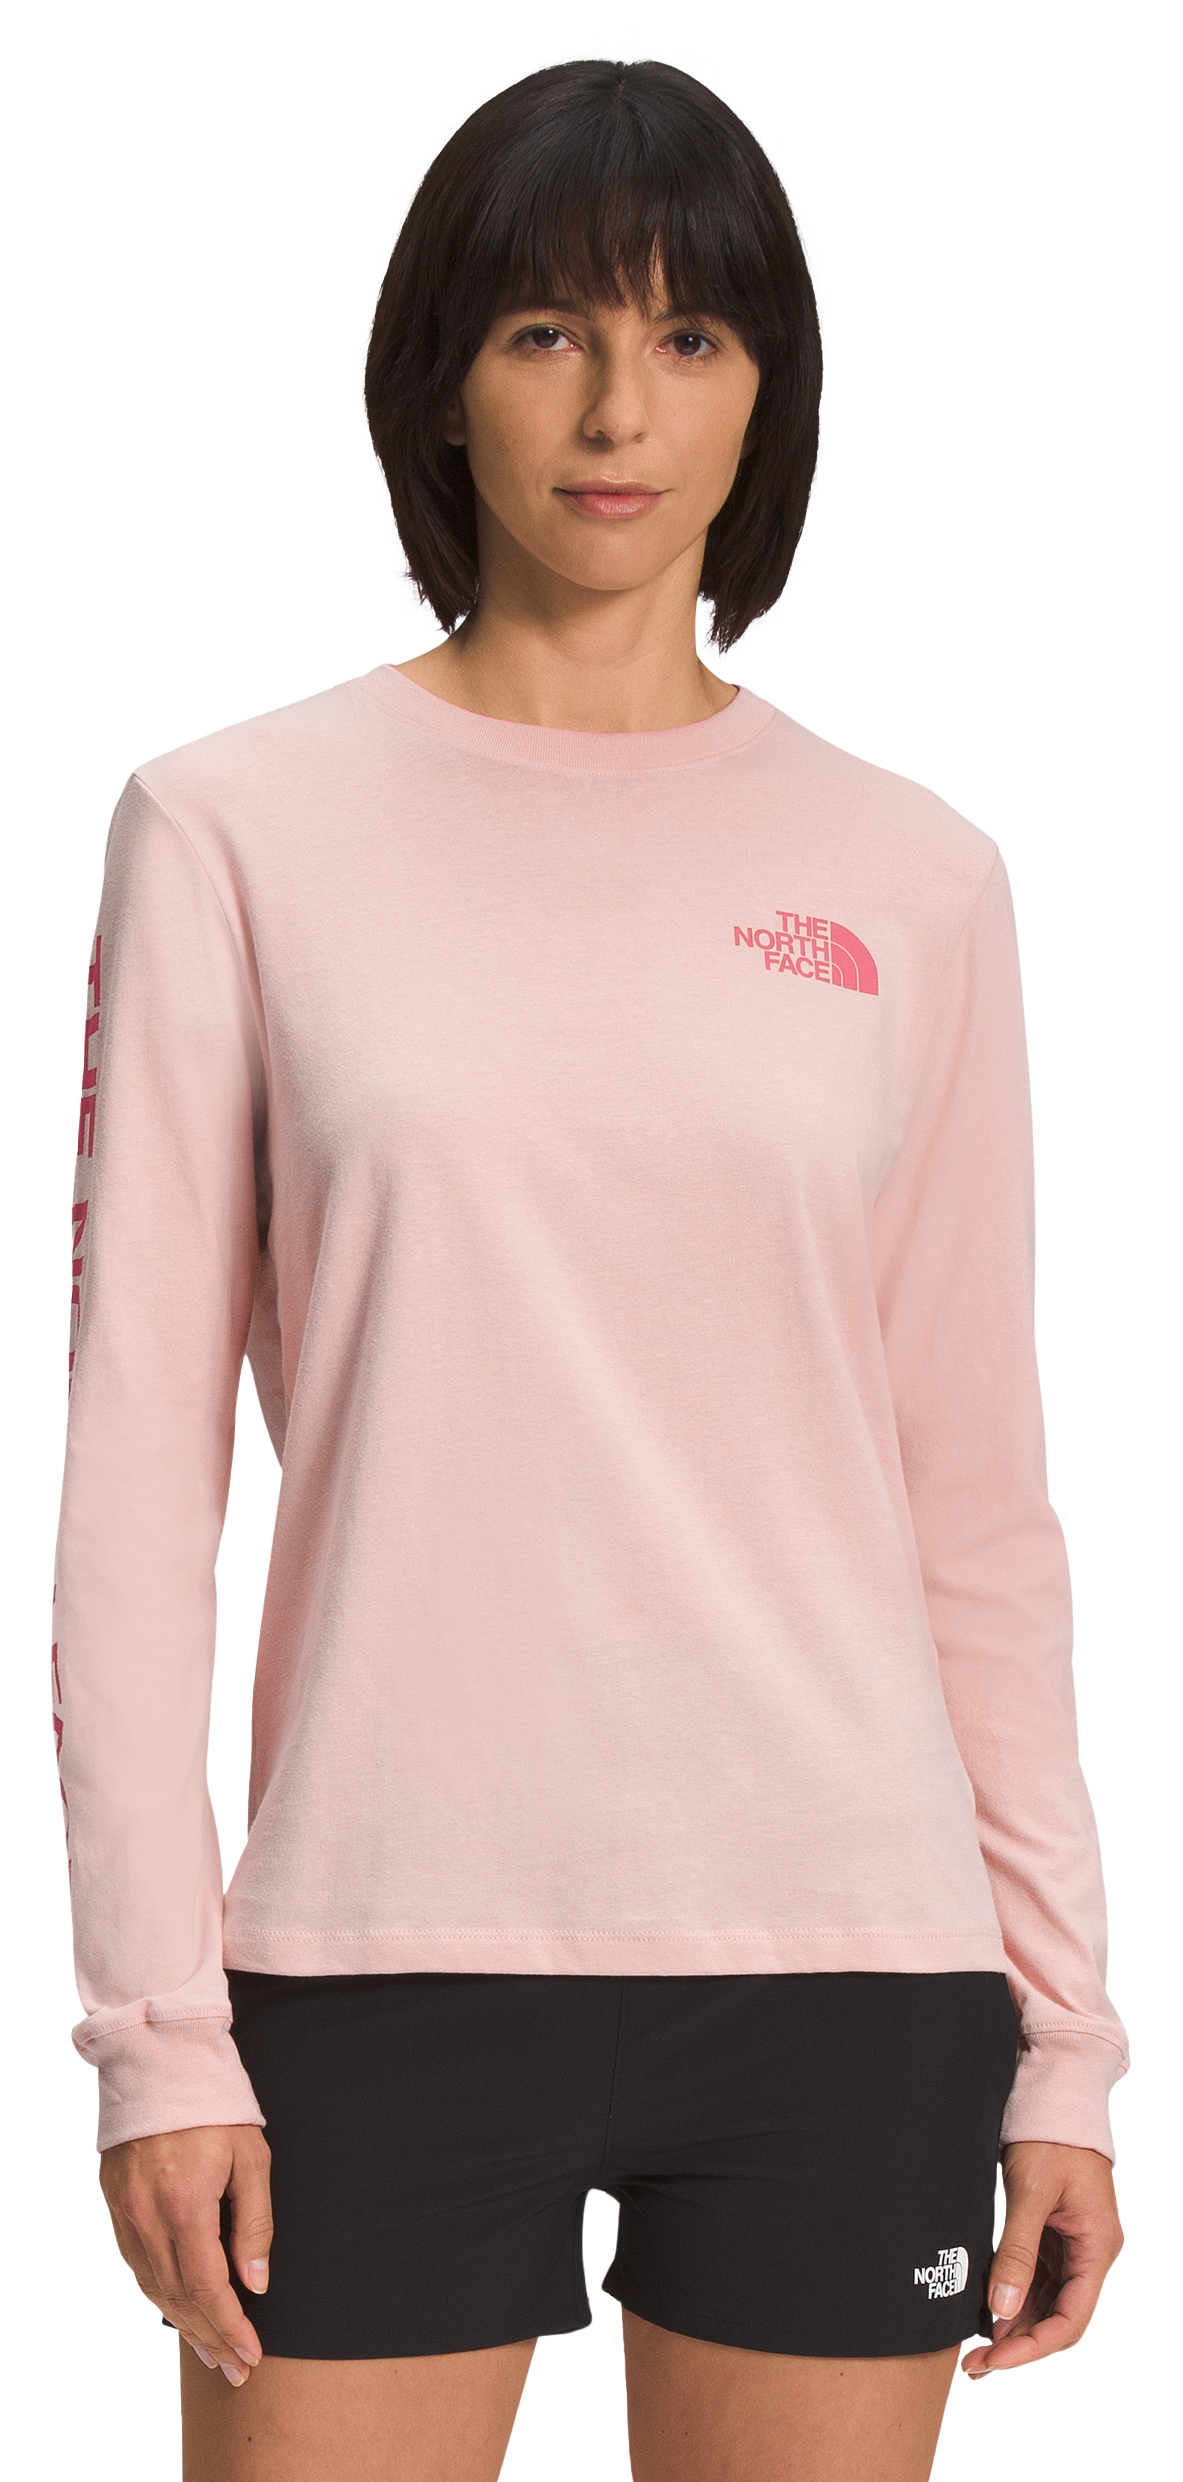 The North Face Hit Graphic Long-Sleeve T-Shirt for Ladies - Pink Moss/Cosmo Pink - M